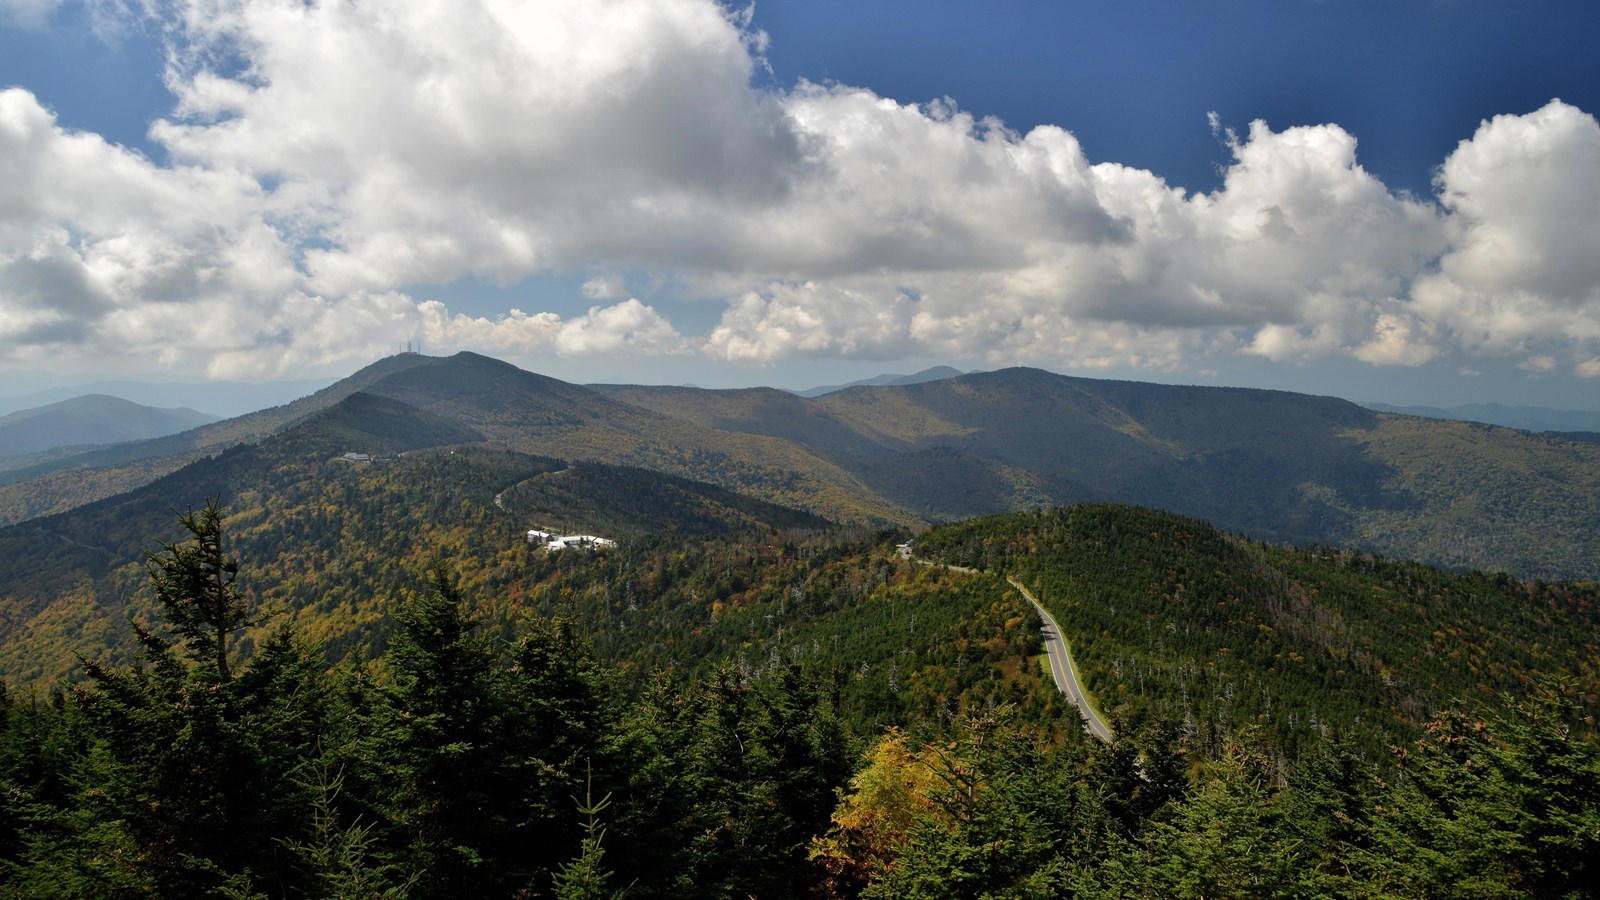 Mount Mitchell, the highest peak in the Eastern U.S.